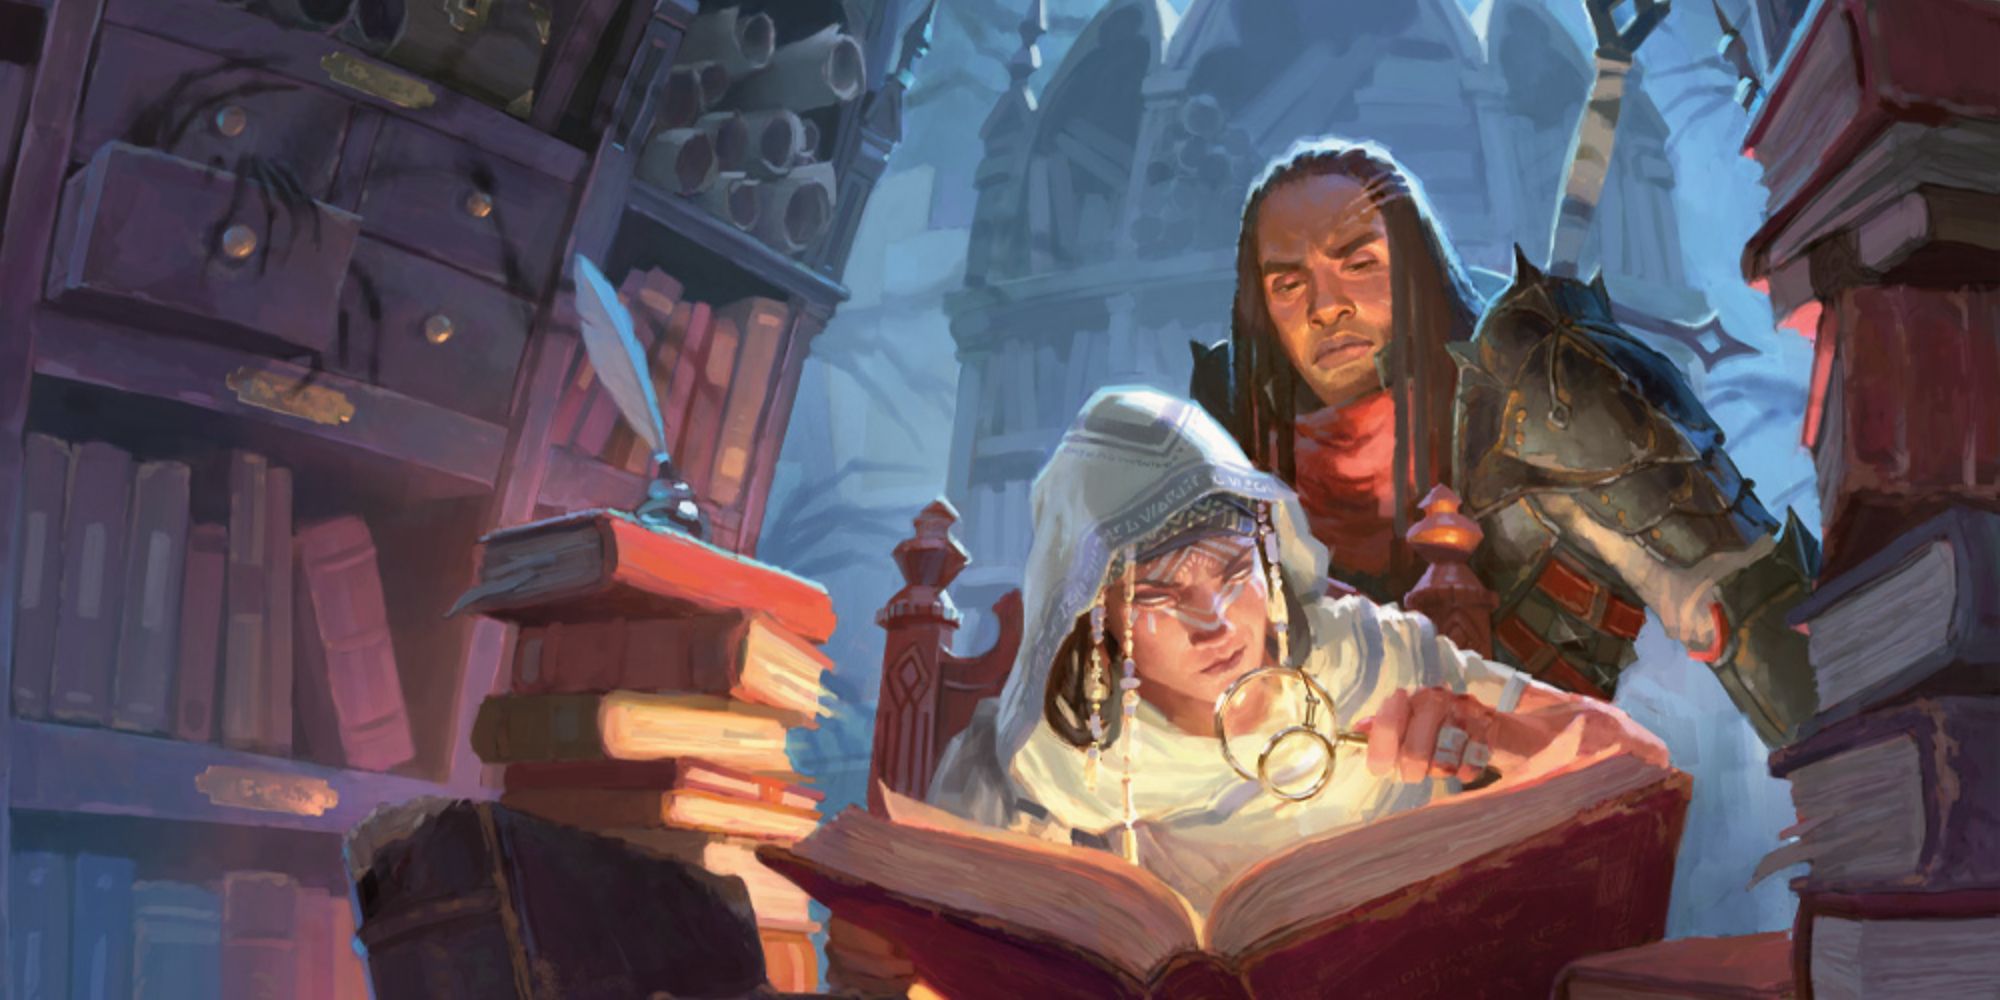 Two people looking at glowing books in the Dungeons and Dragons library